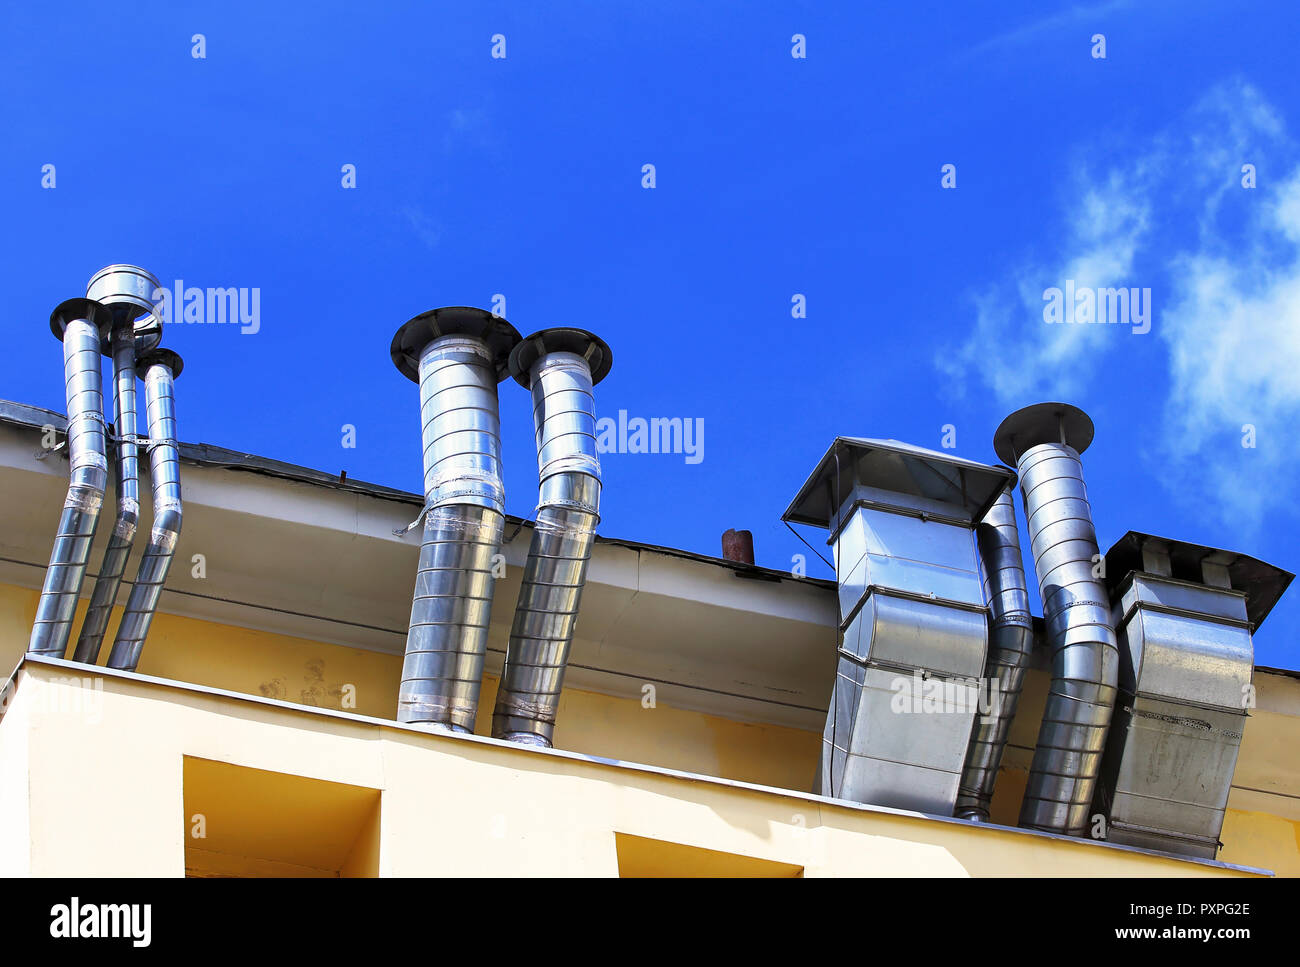 Ventilation pipes and actuators on the roof of building Stock Photo